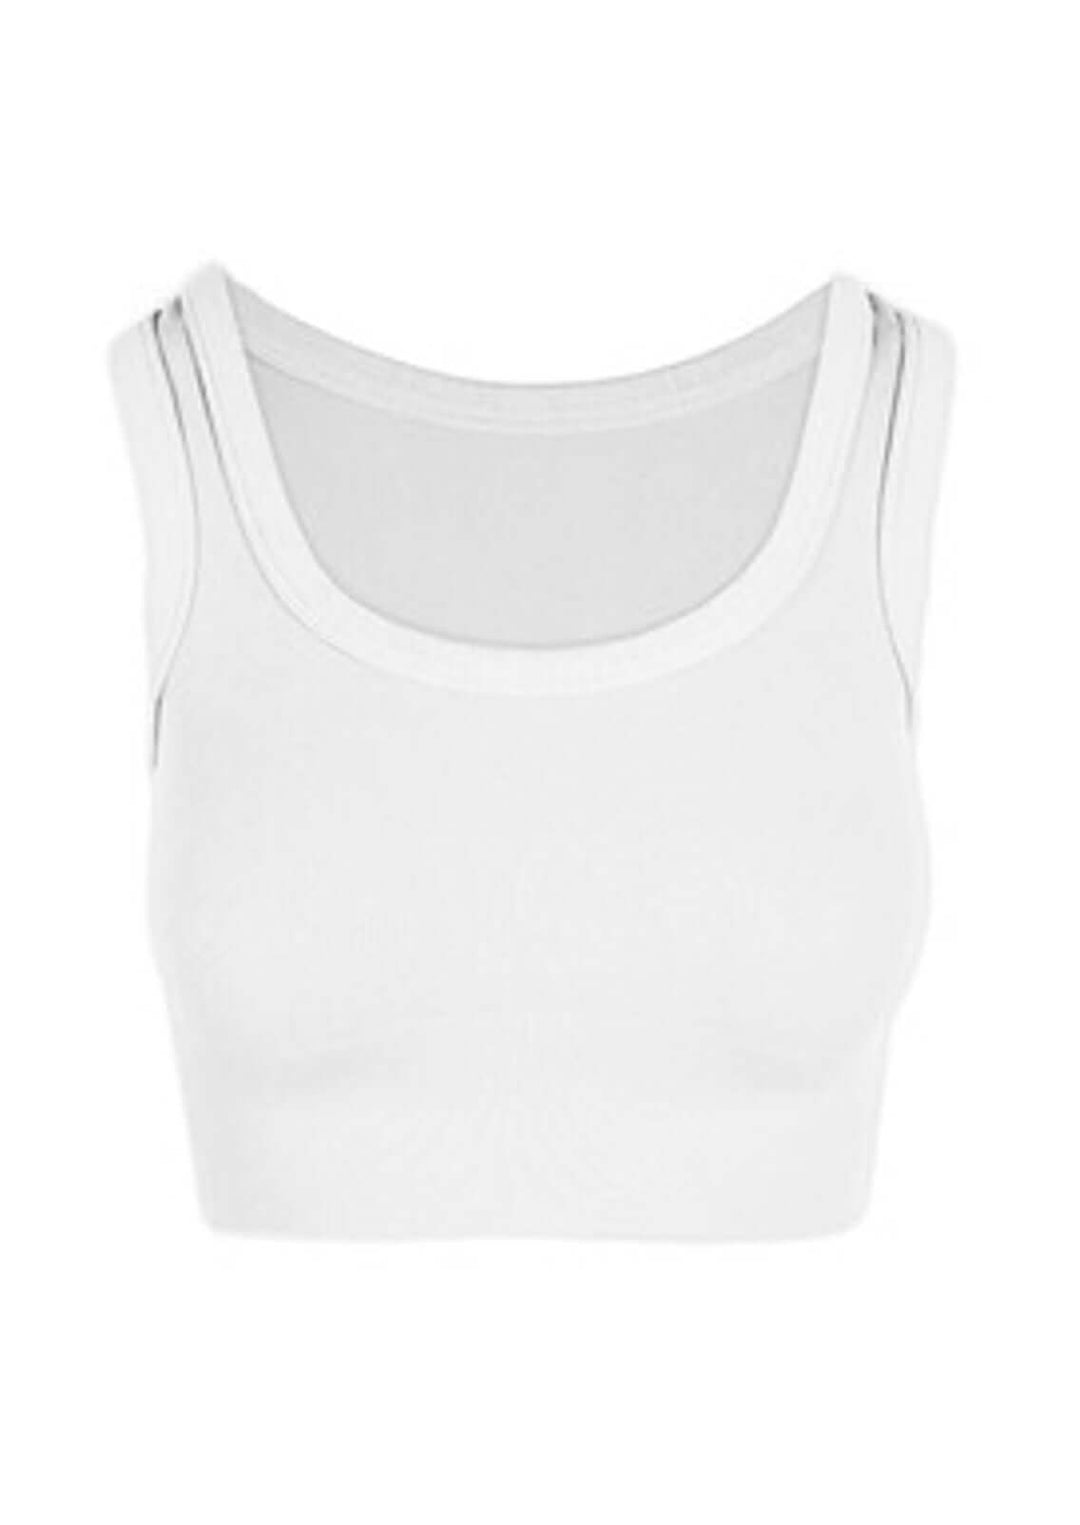 Niki Biki Ladies White Cropped Tank Top Style# NS8121 | Made in USA | Classy Cozy Cool Women's Made in America Clothing Boutique